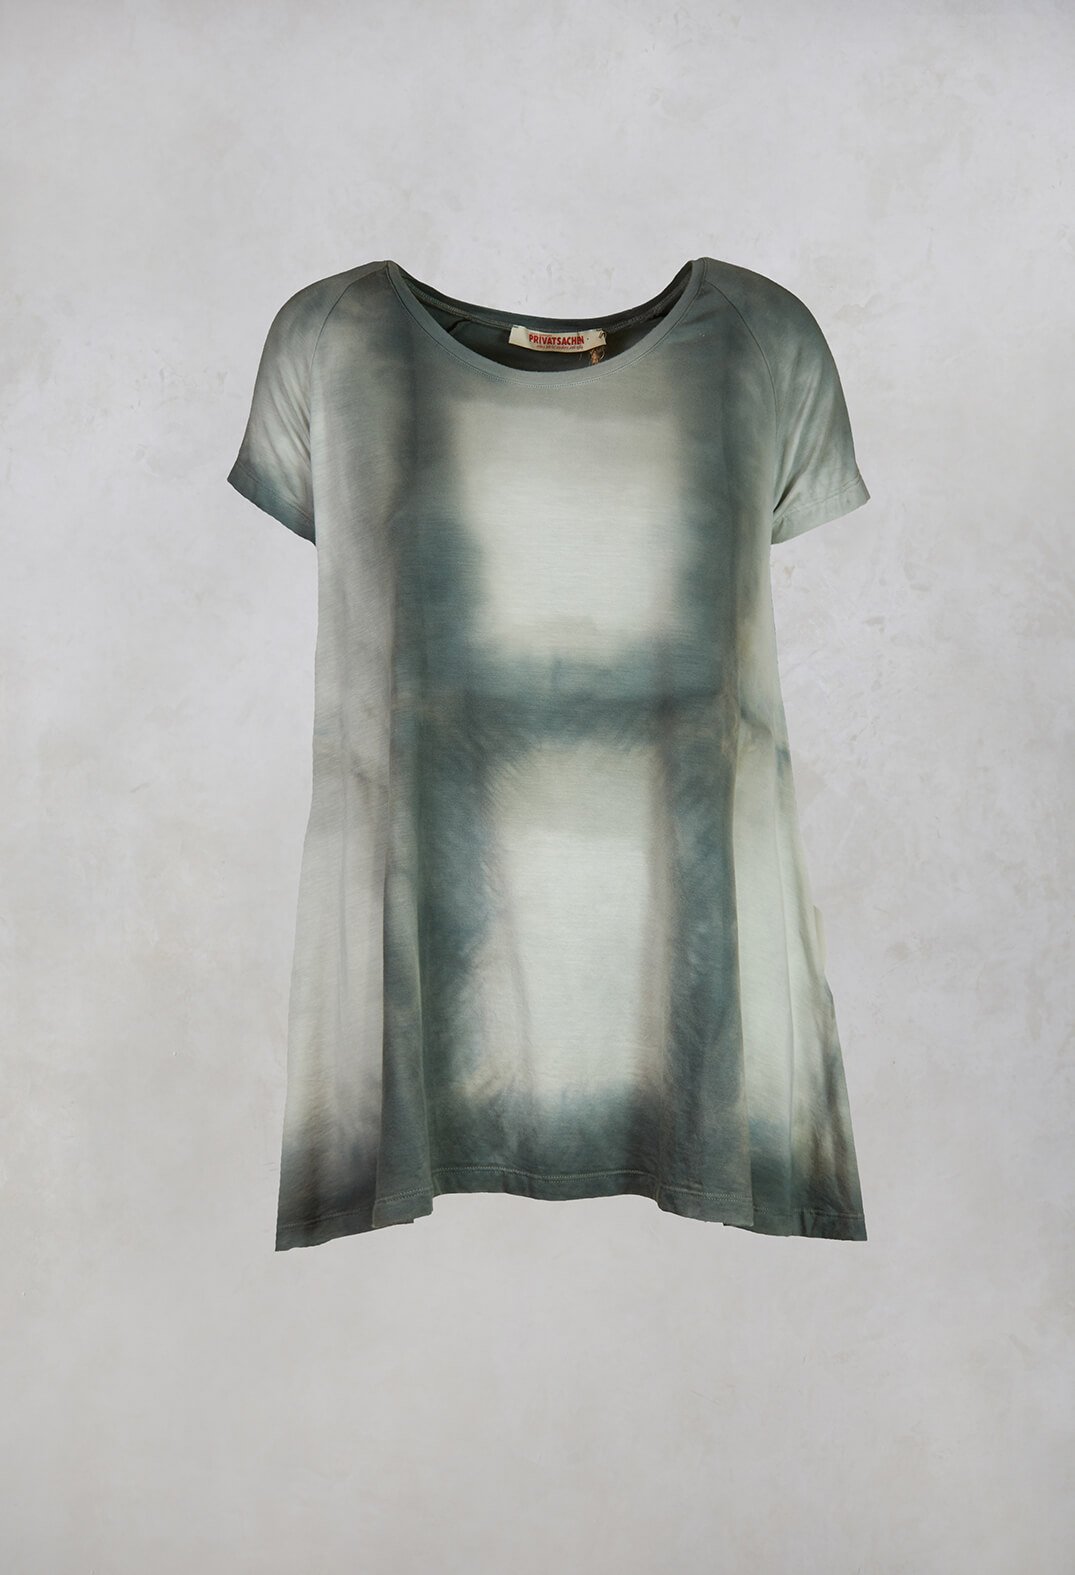 Albands T-Shirt in Sage